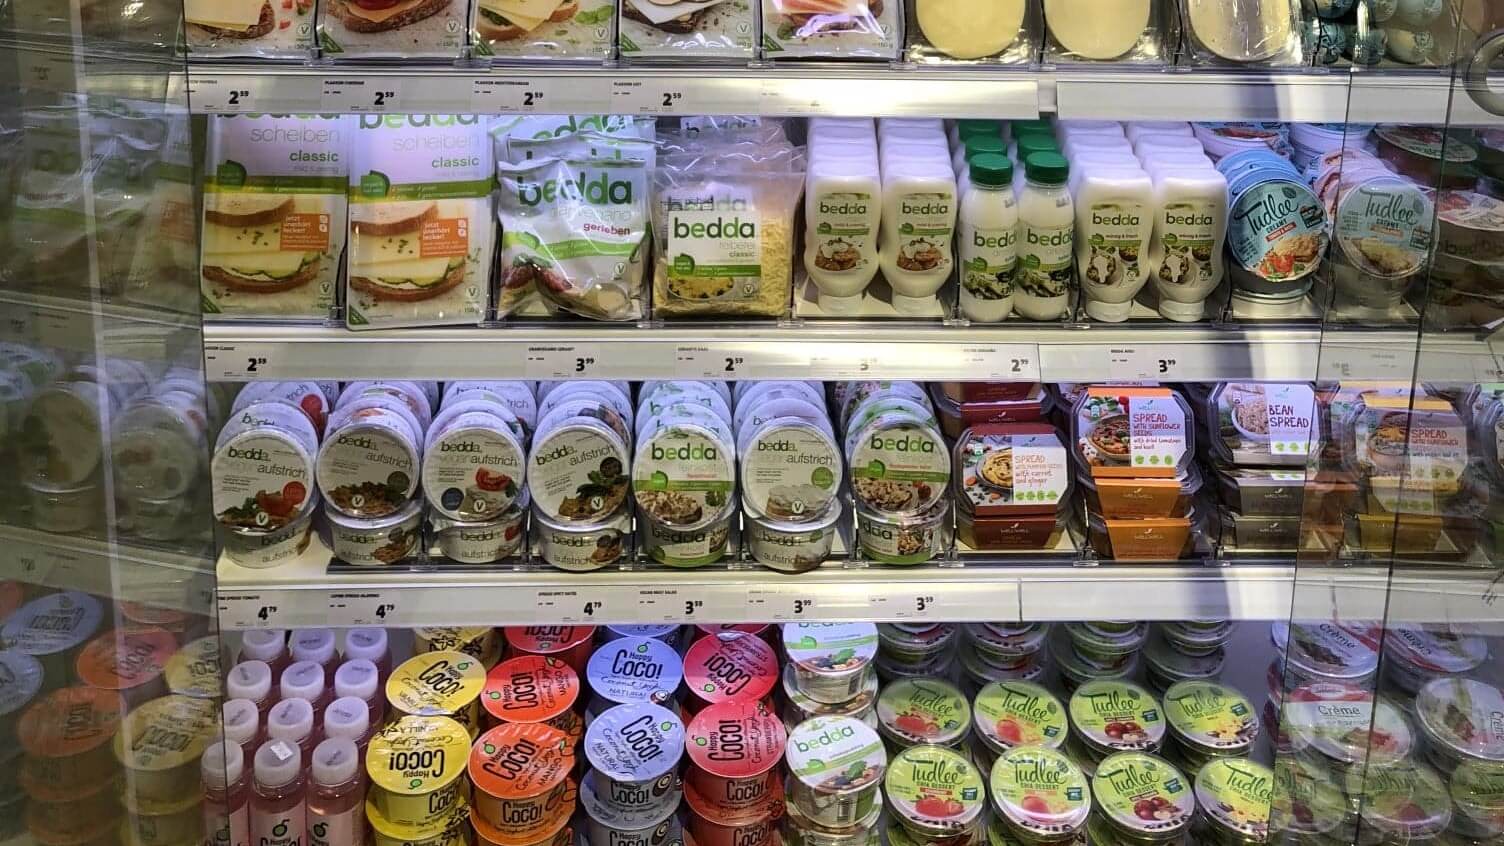 Dutch Supermarket Chain Jumbo Aims for 60% Plant-Based Proteins by